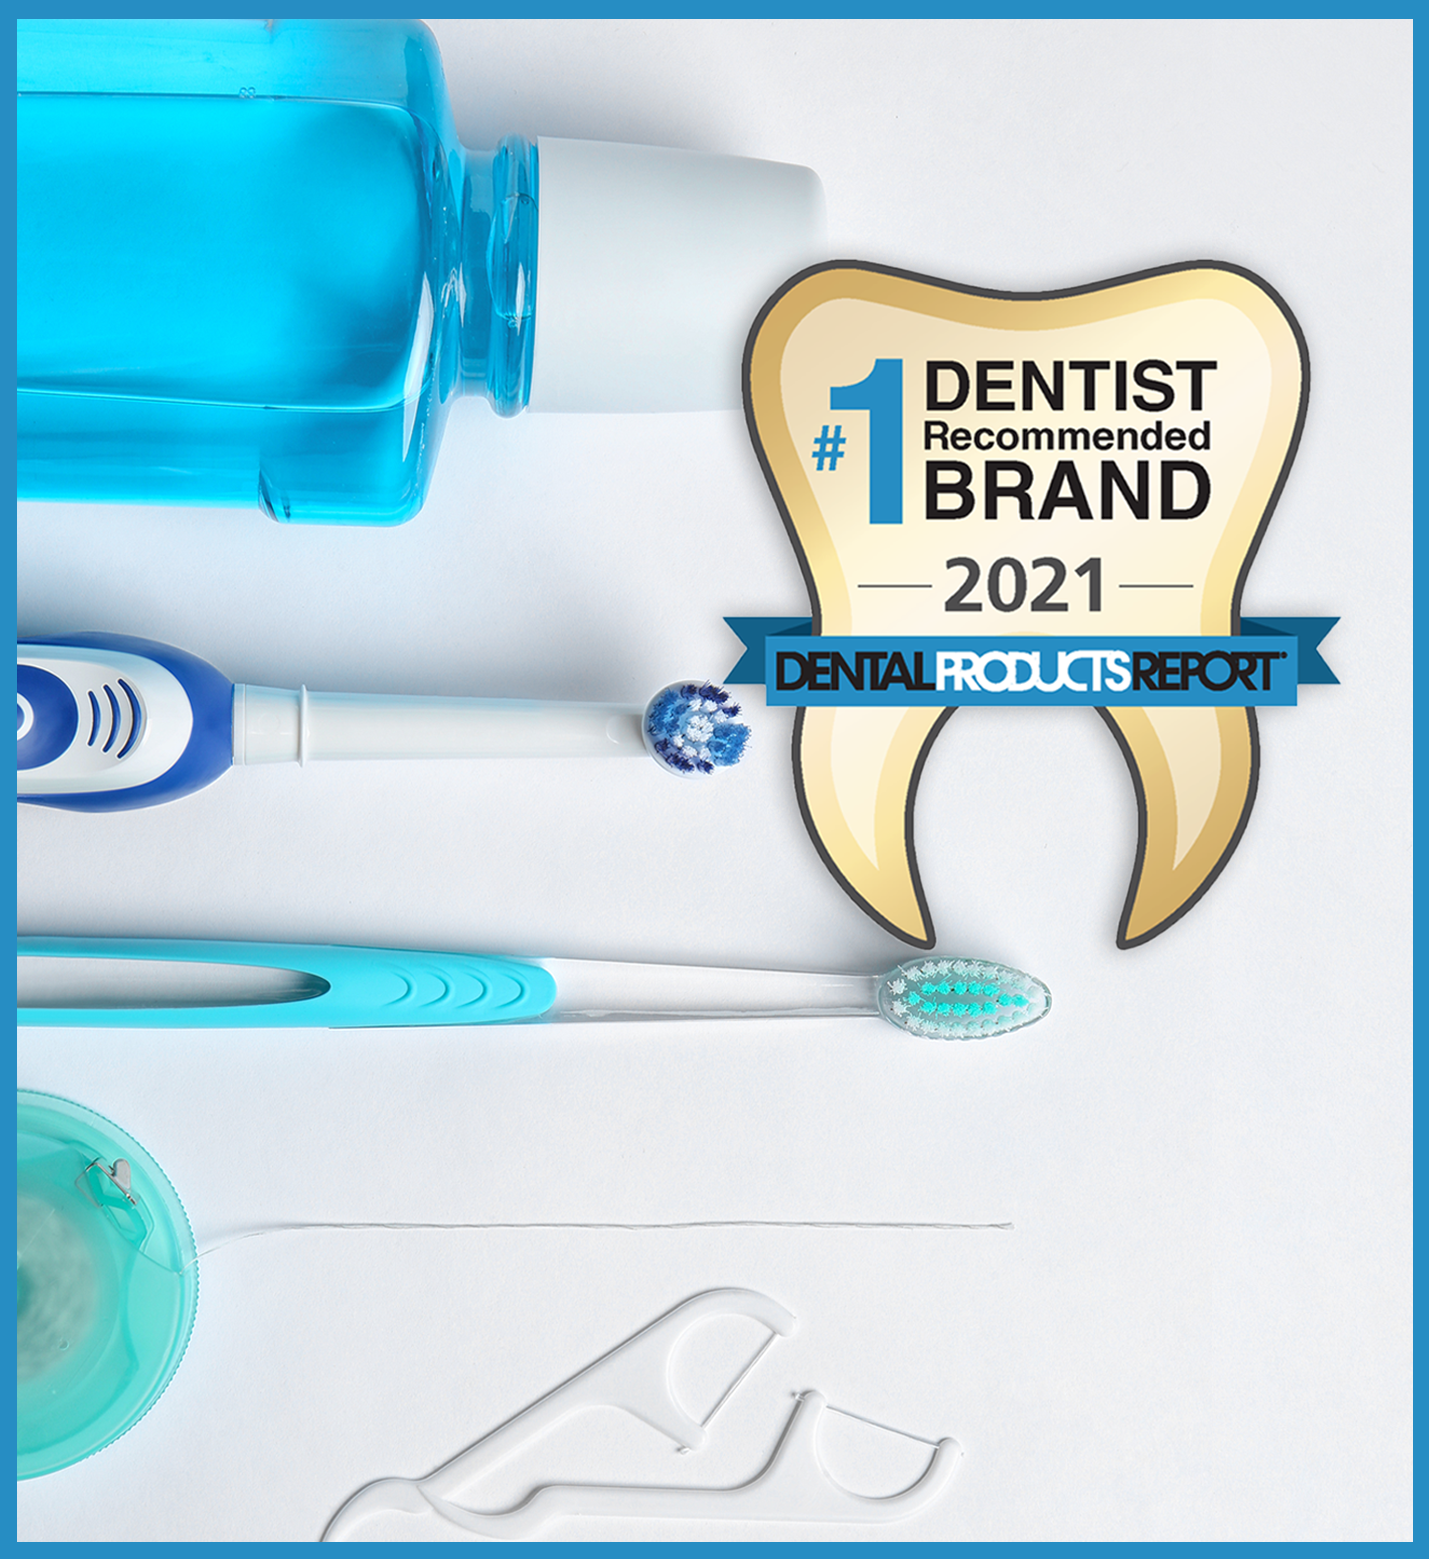 2021 Dental Products Report #1 Dentist Recommended Brand